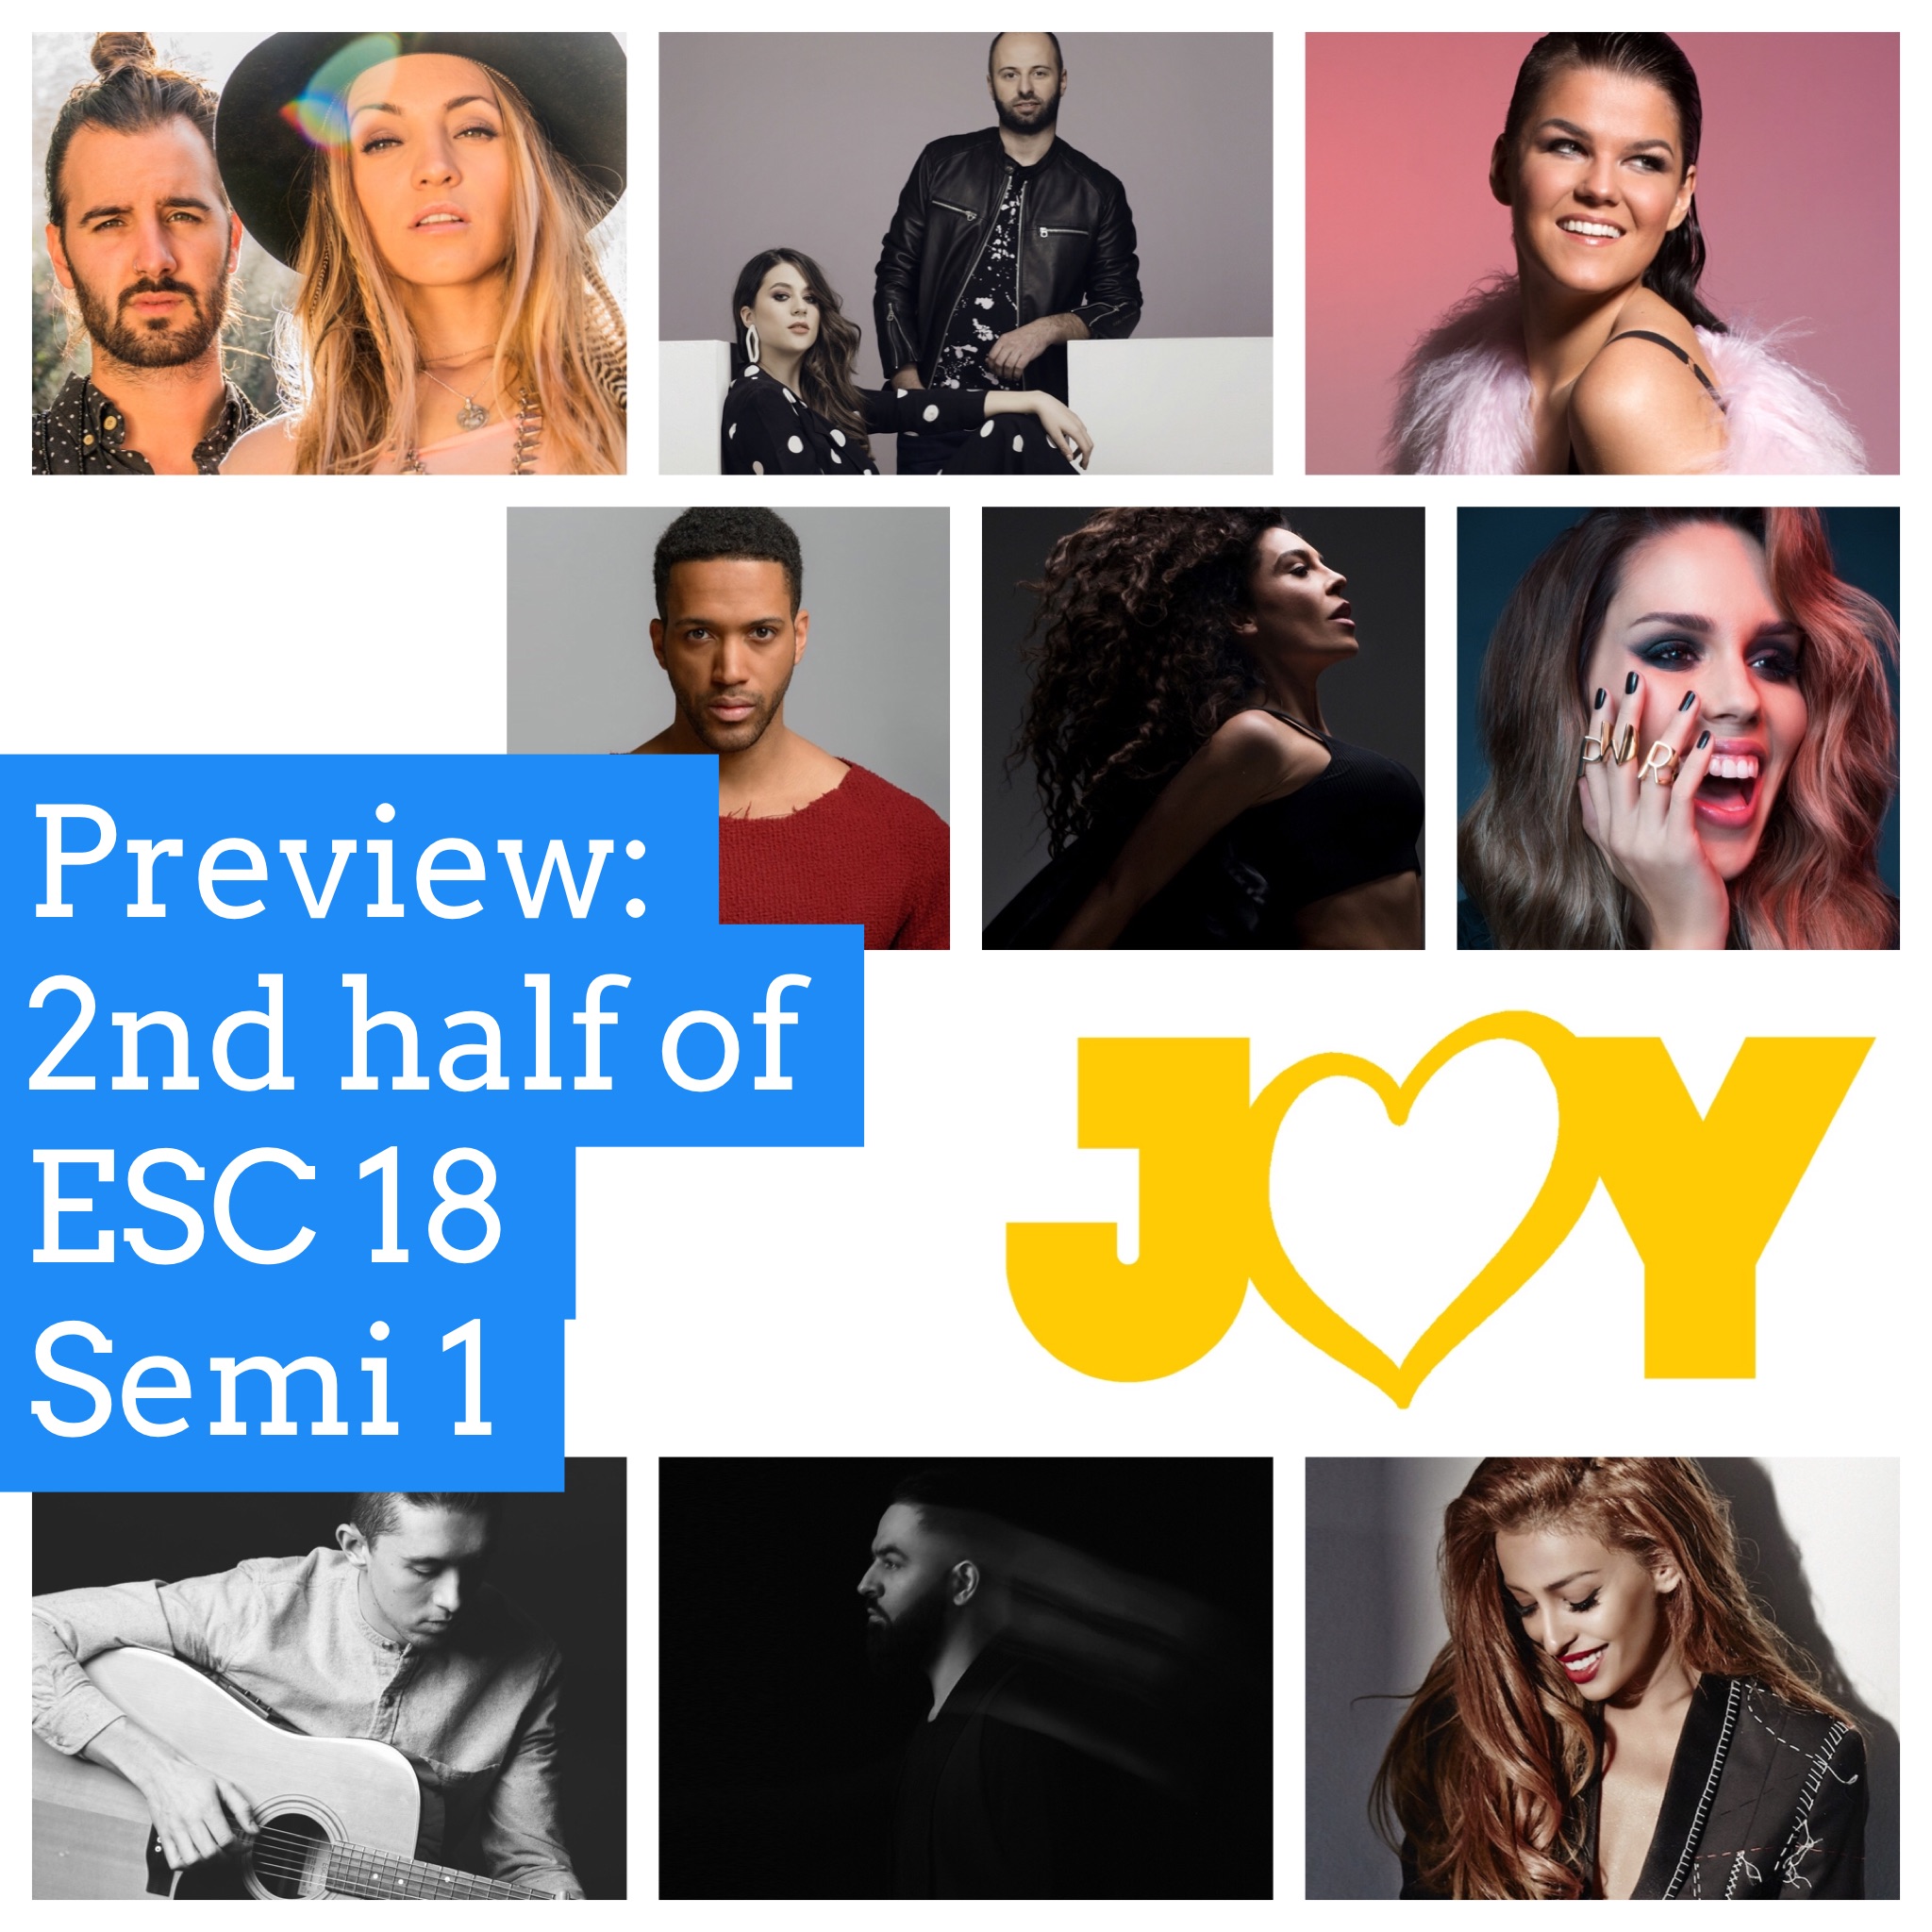 Eurovision 2018: Previewing the second half of Semi Final 1